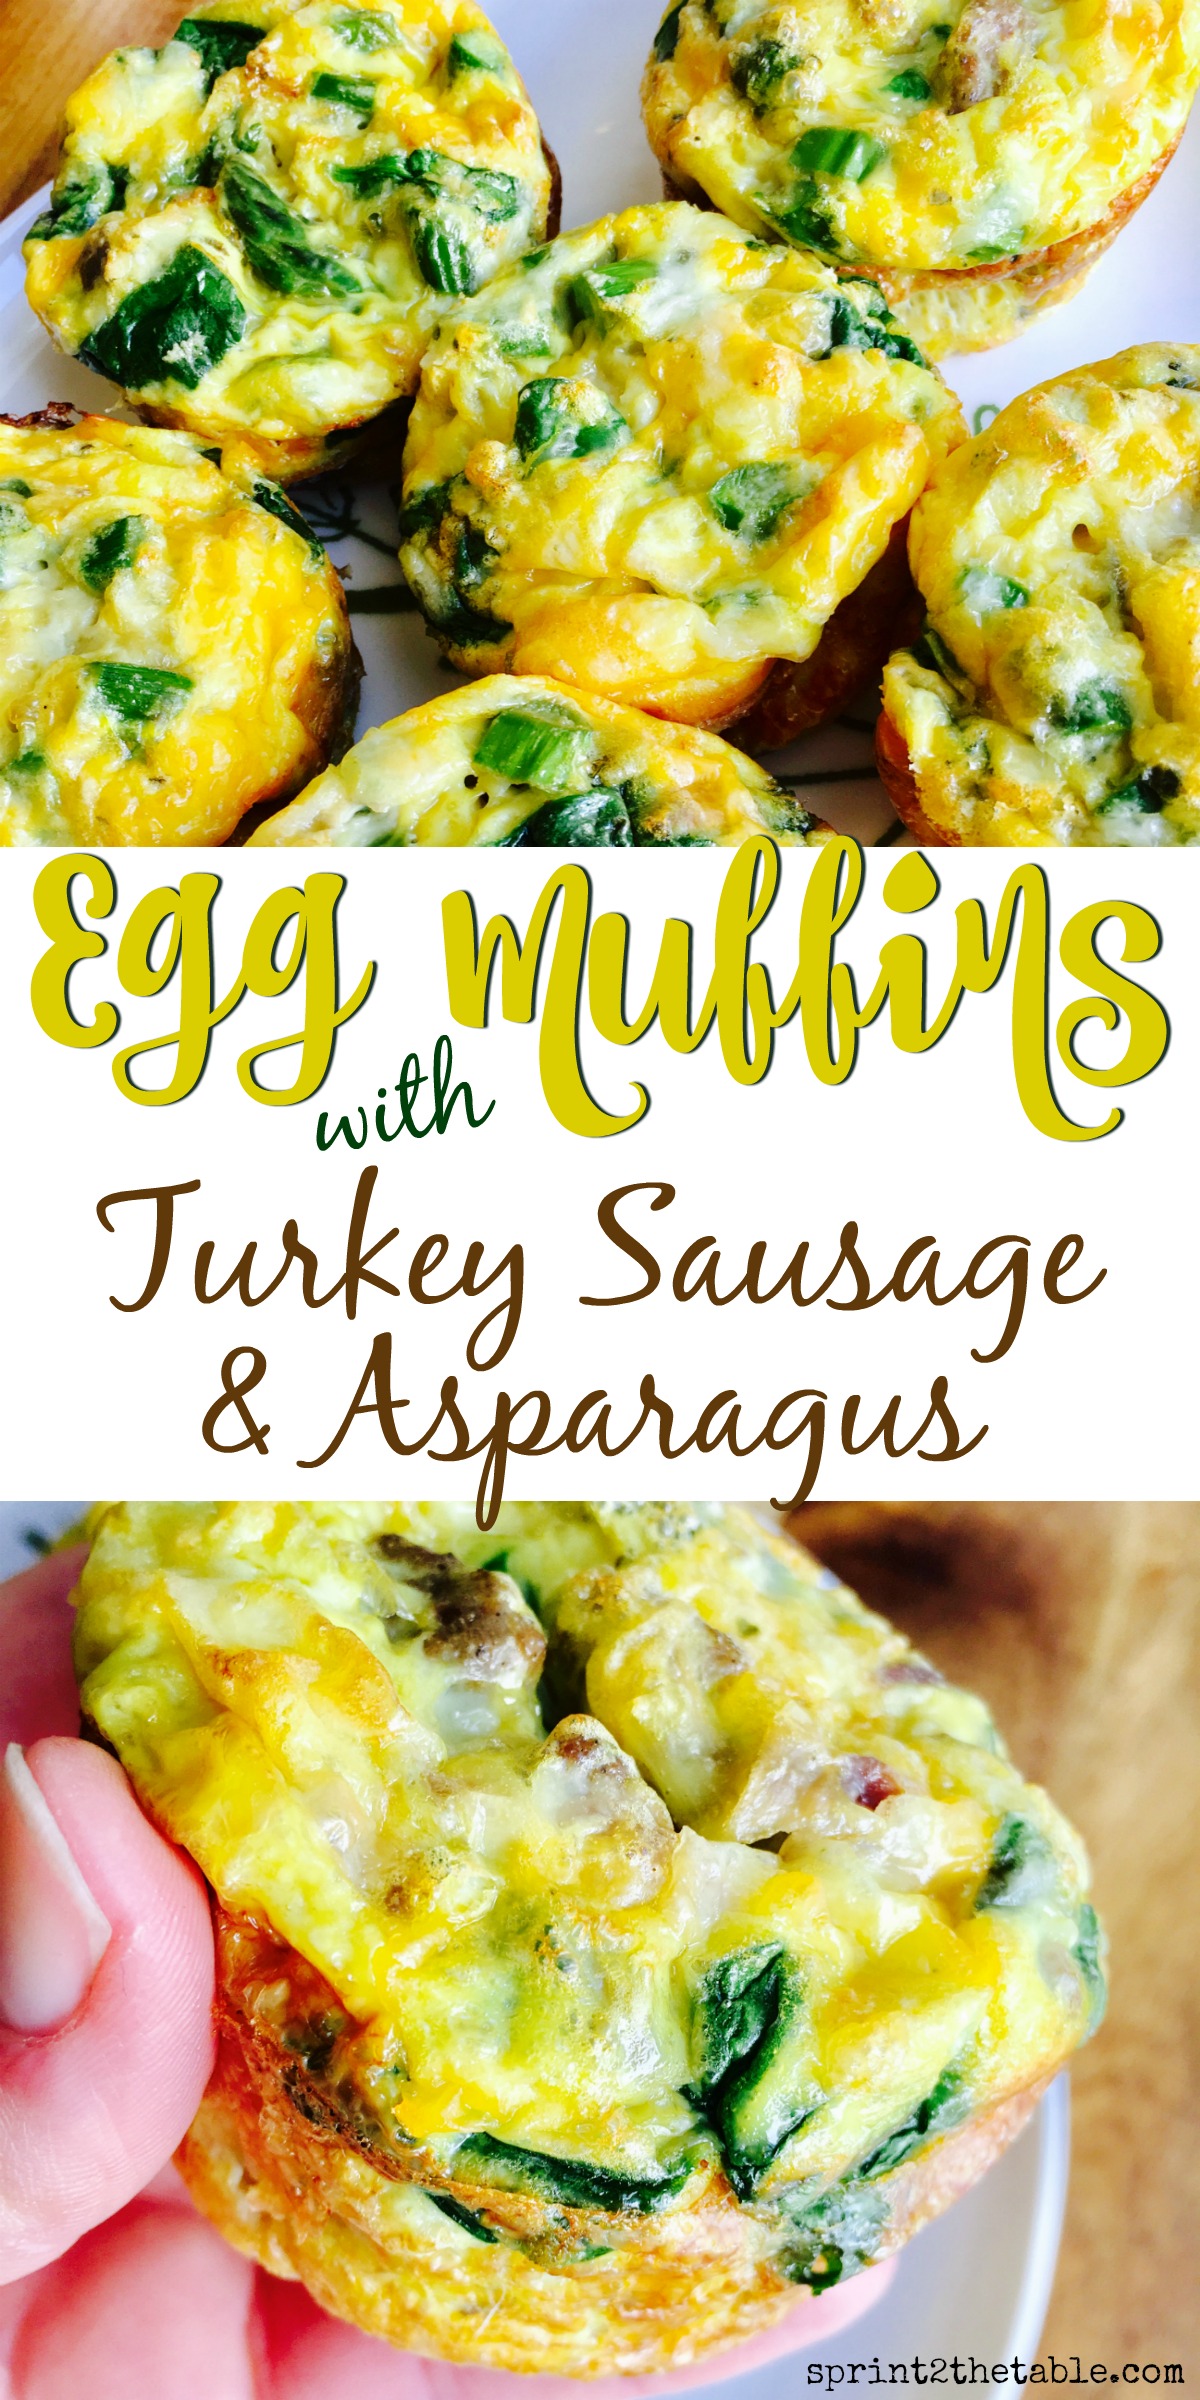 Egg muffins with turkey sausage and asparagus are easy to make and even easier to eat! They can be made ahead of time and reheated for the perfect grab and go breakfast.